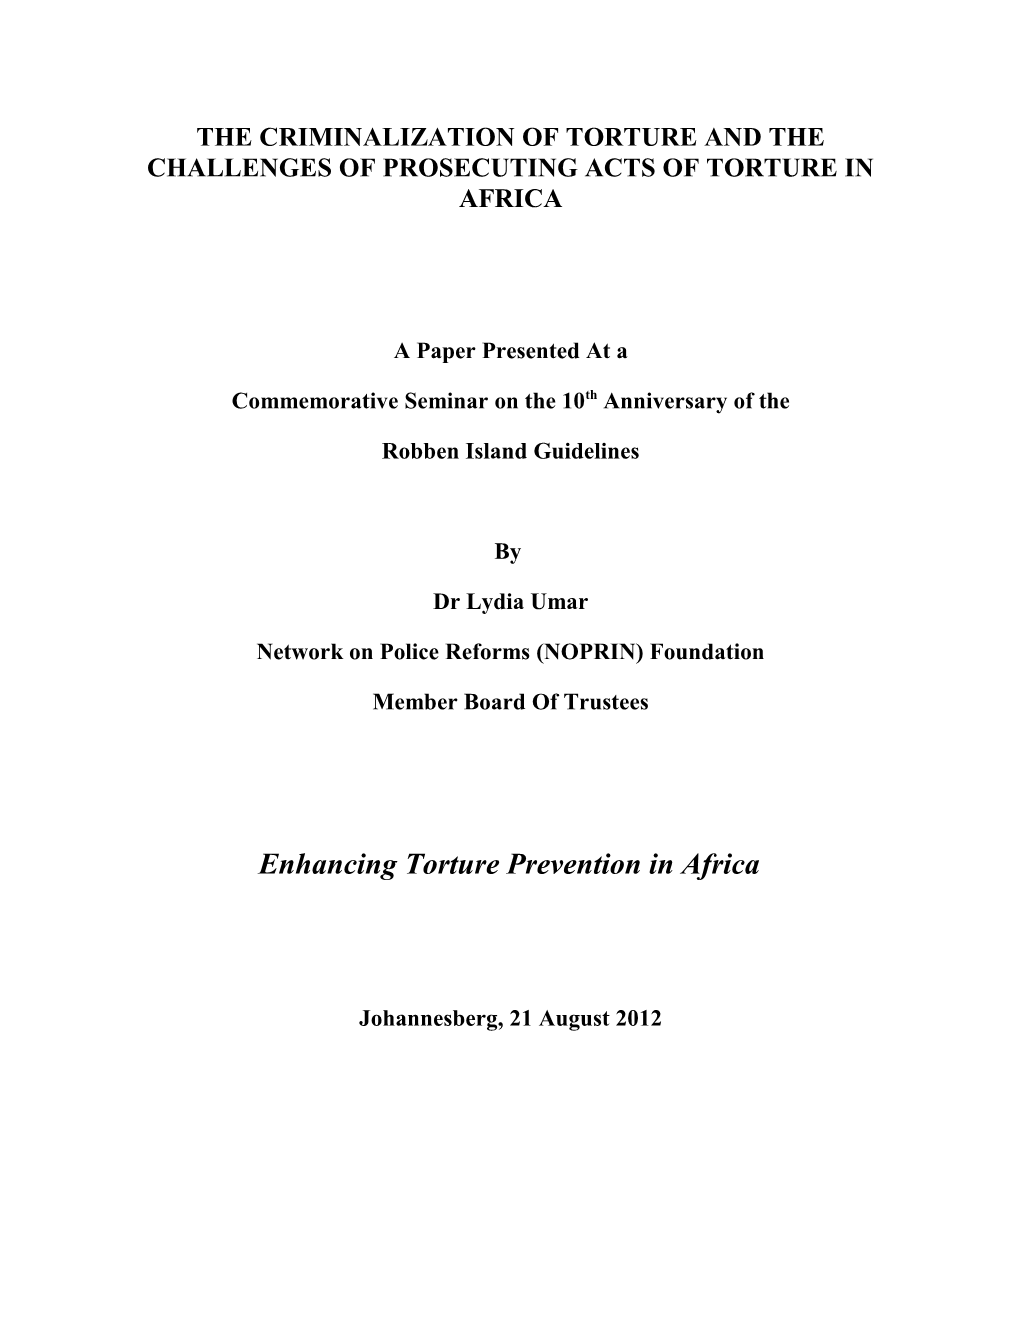 The Criminalization of Torture and the Challenges of Prosecuting Acts of Torture in Africa